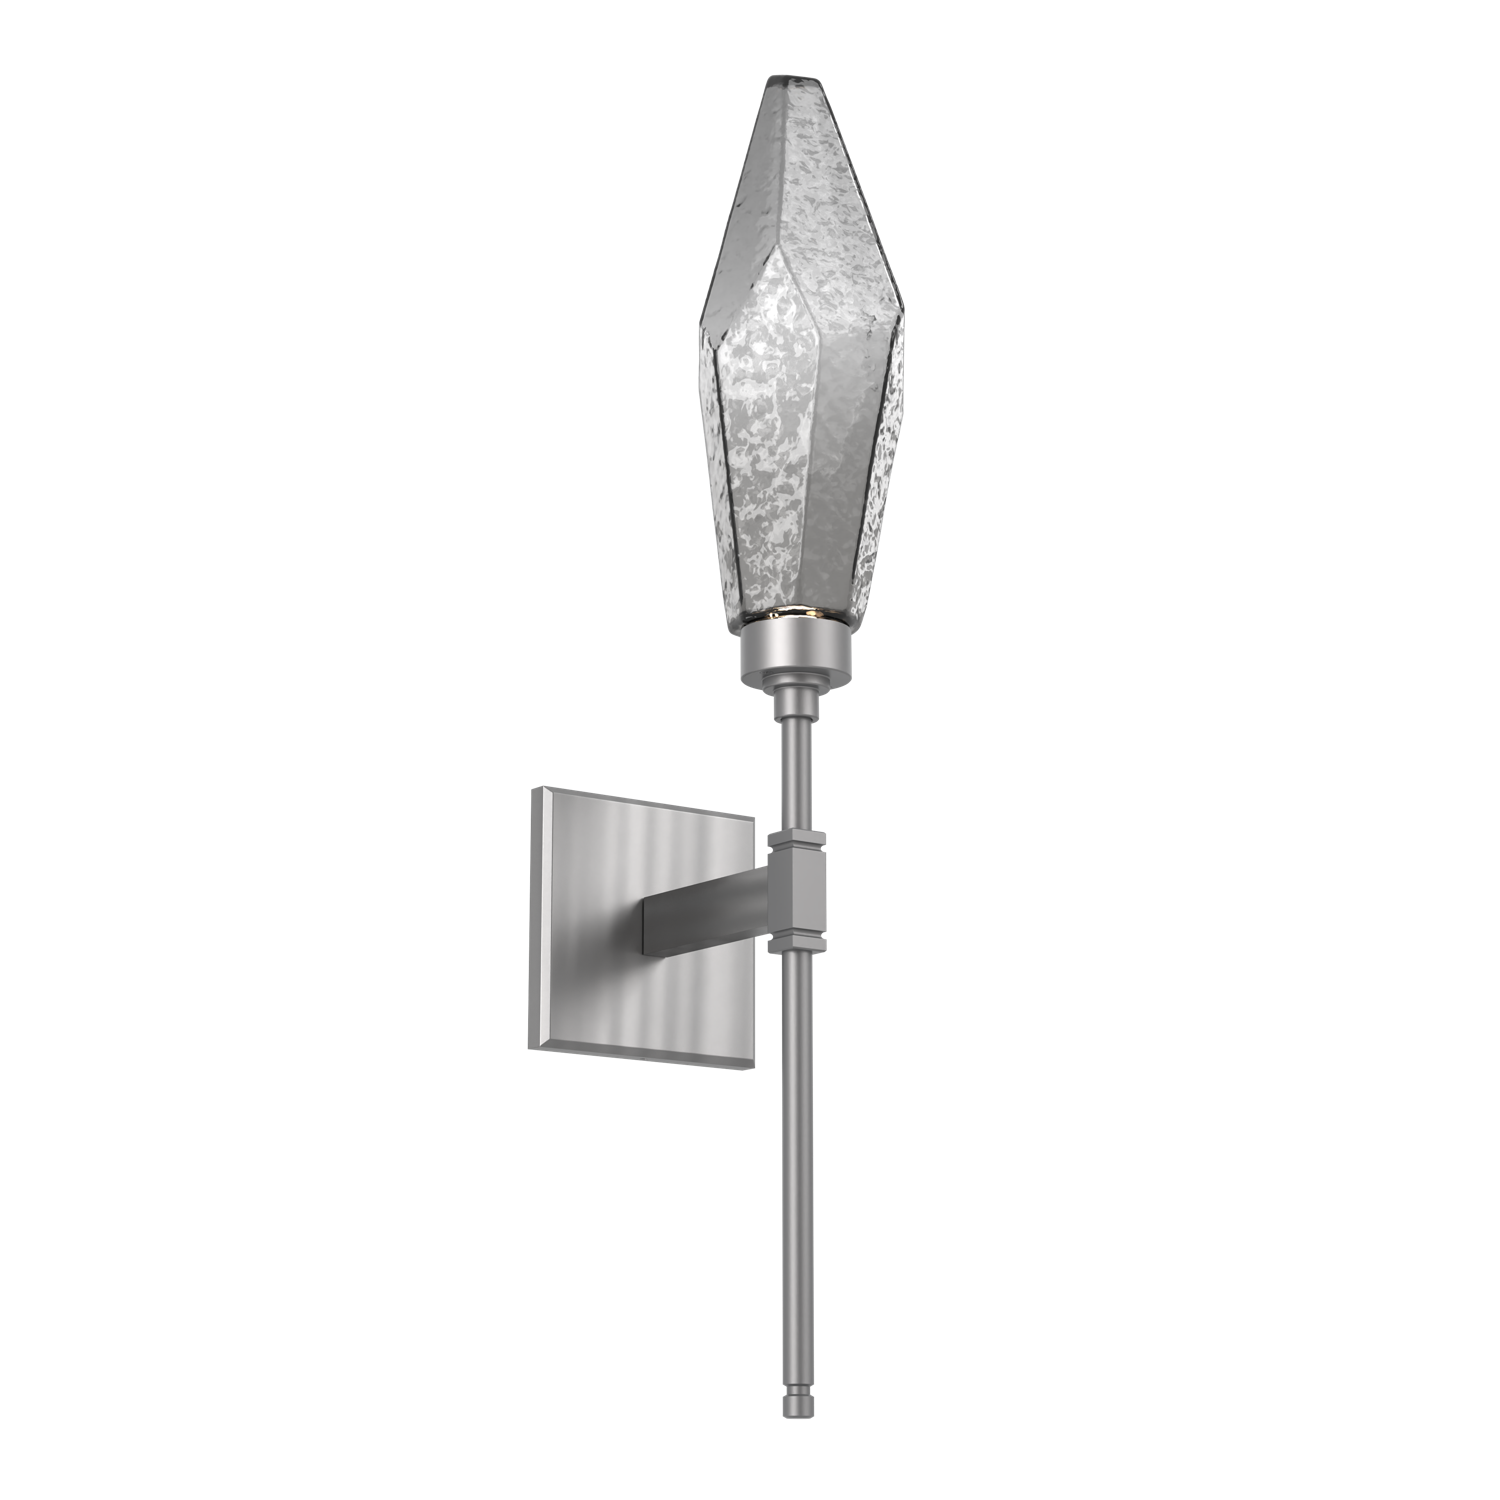 IDB0050-07-SN-CS-Hammerton-Studio-Rock-Crystal-belvedere-wall-sconce-with-satin-nickel-finish-and-chilled-smoke-glass-shades-and-LED-lamping